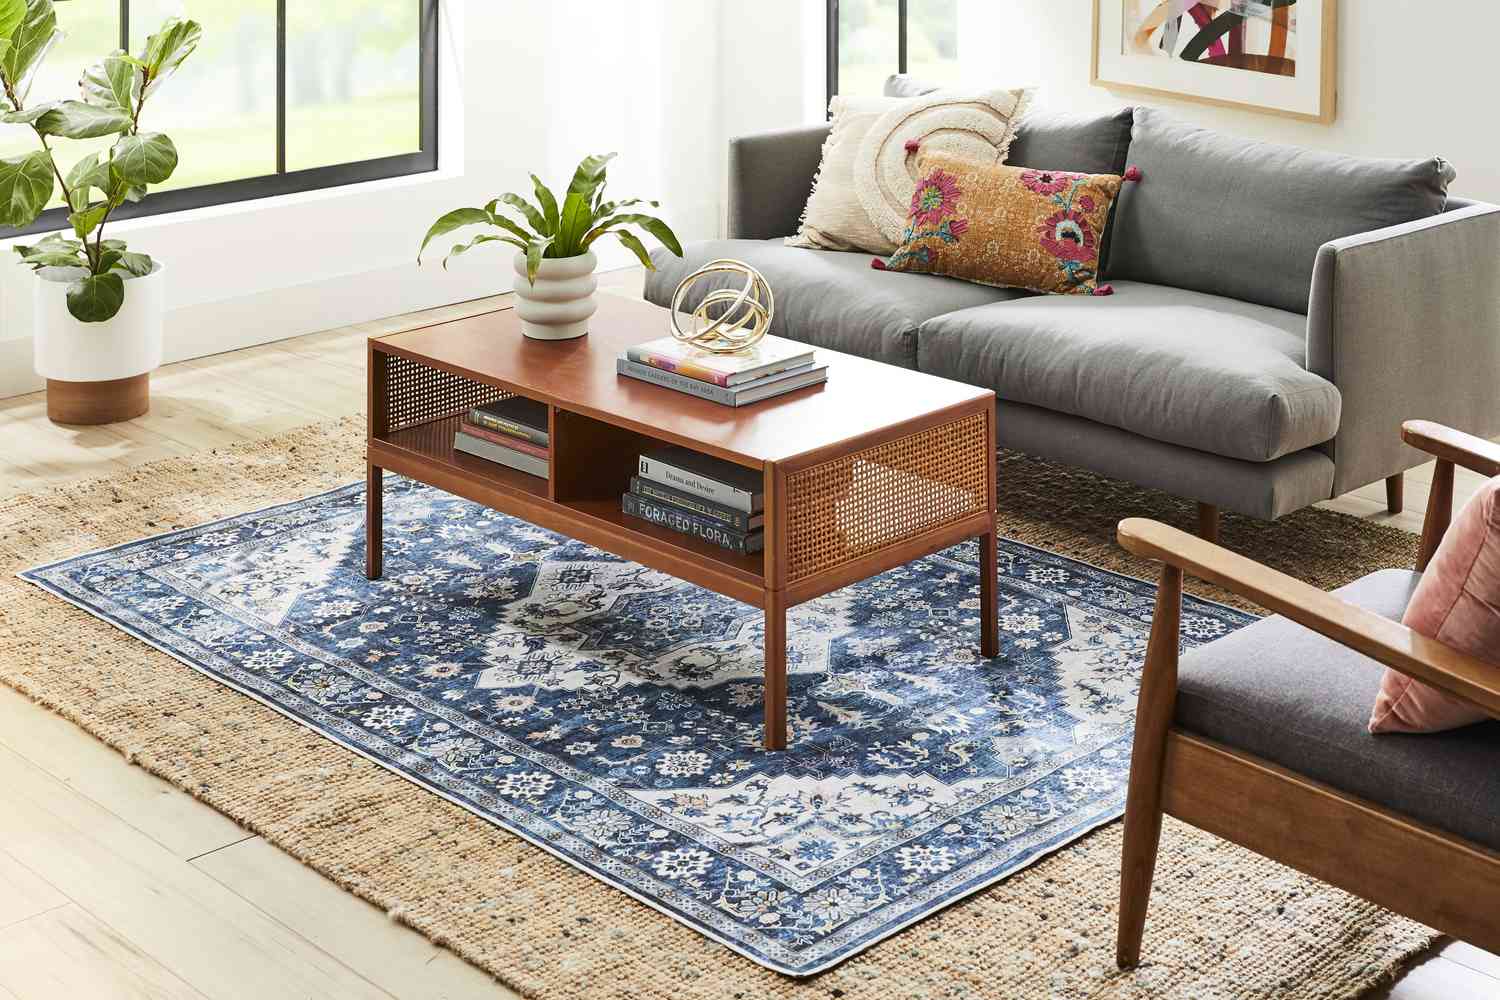 how-to-decorate-with-a-patterned-rug